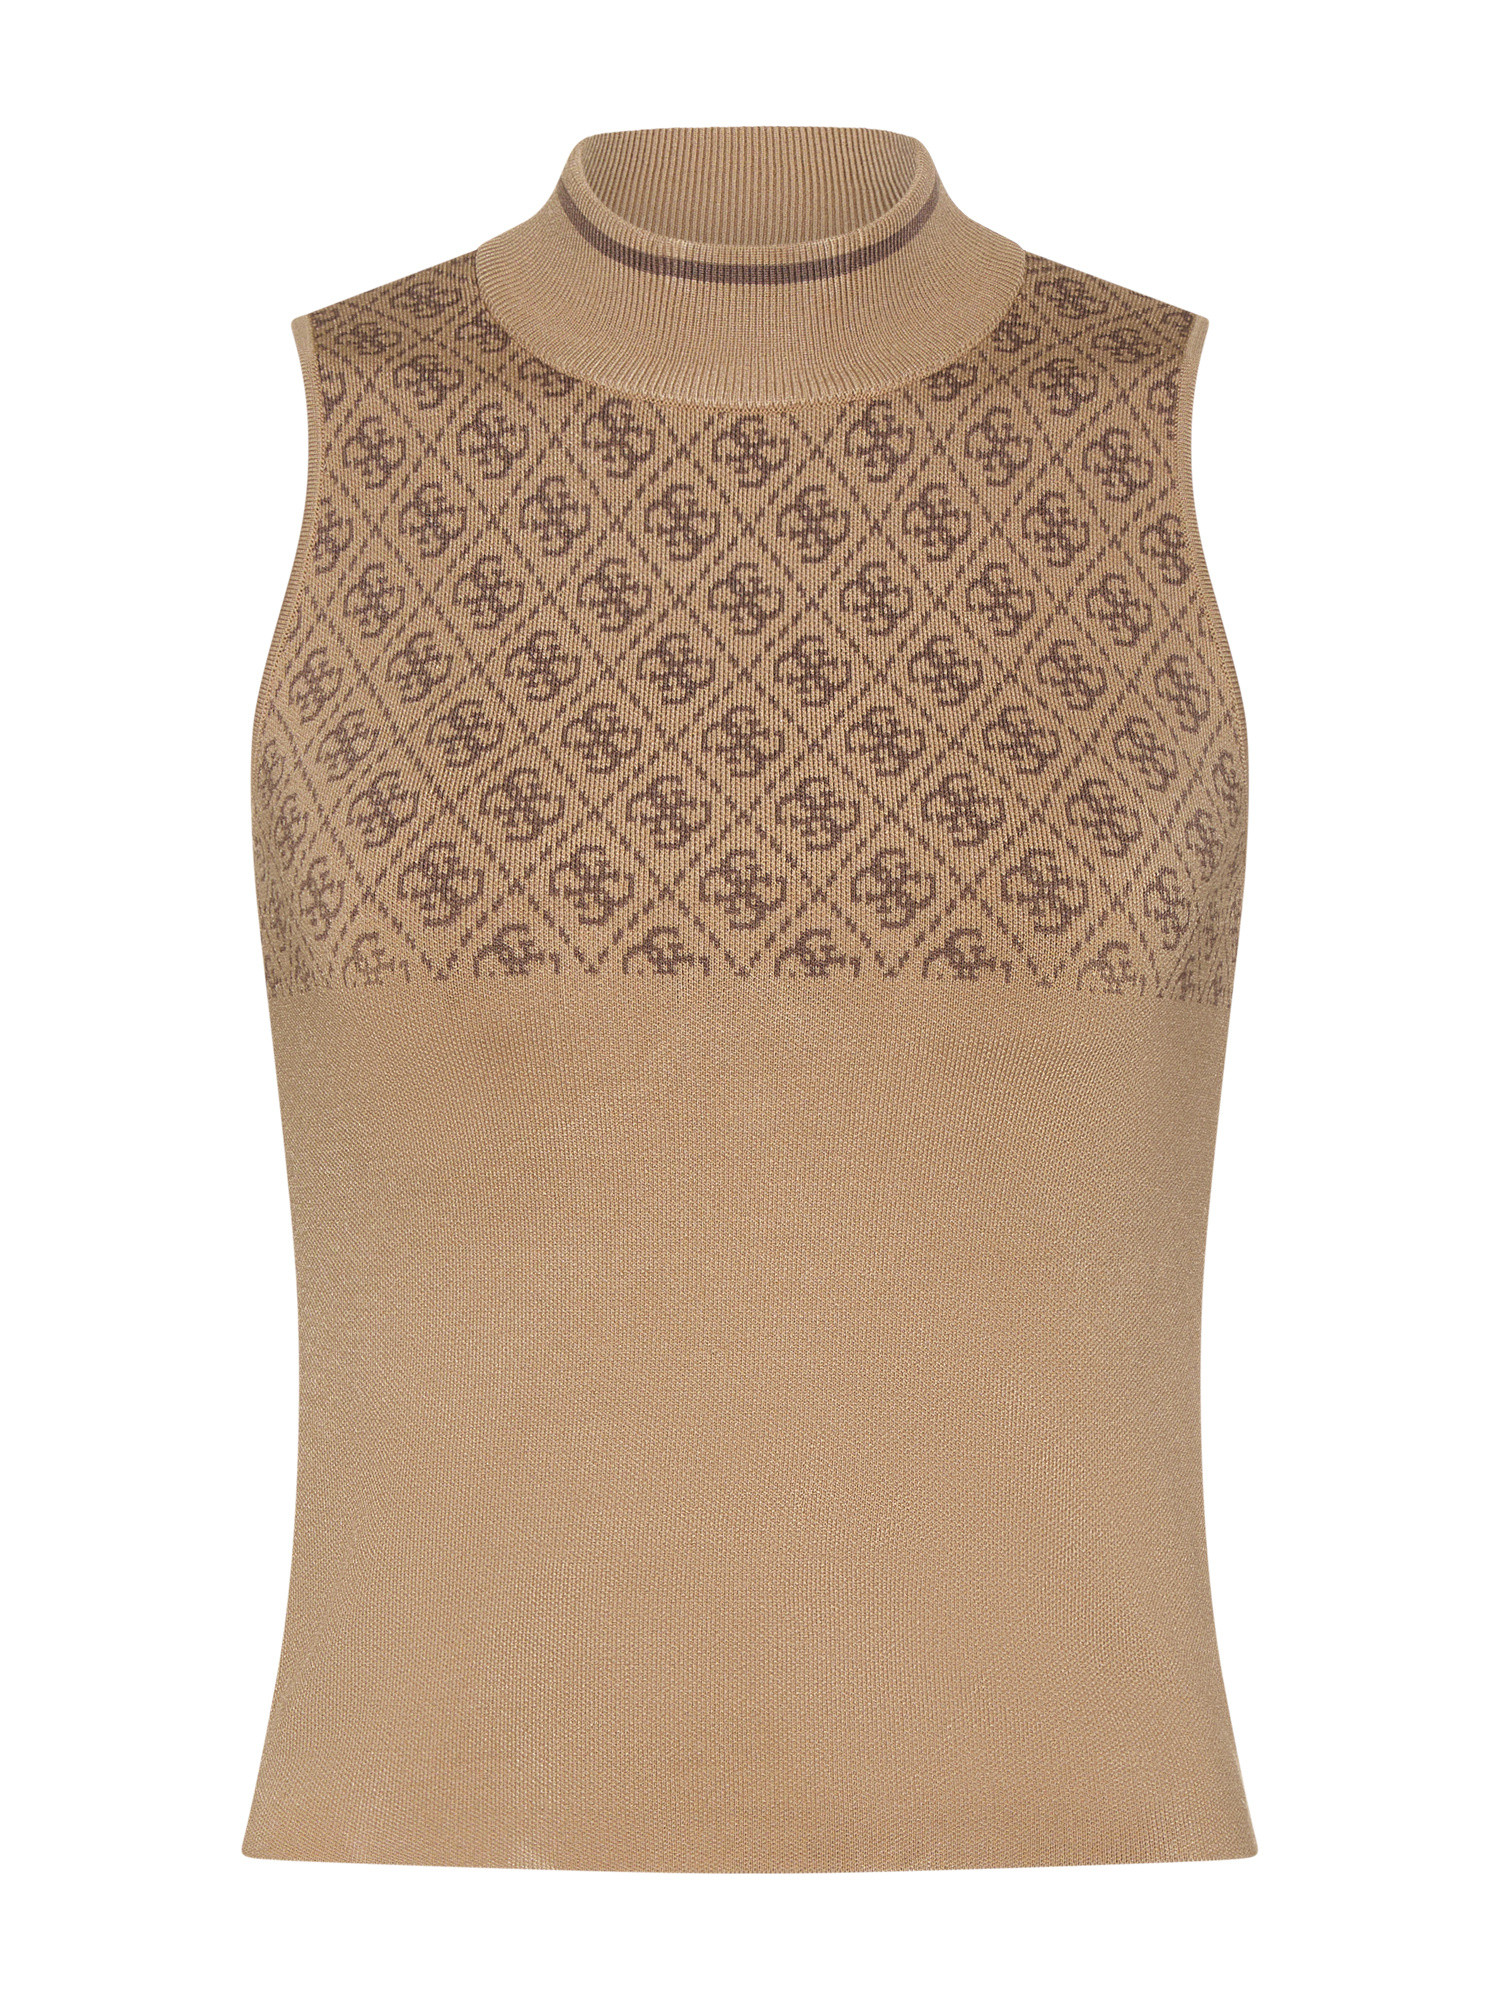 Guess - Top in maglia con logo, Beige, large image number 0